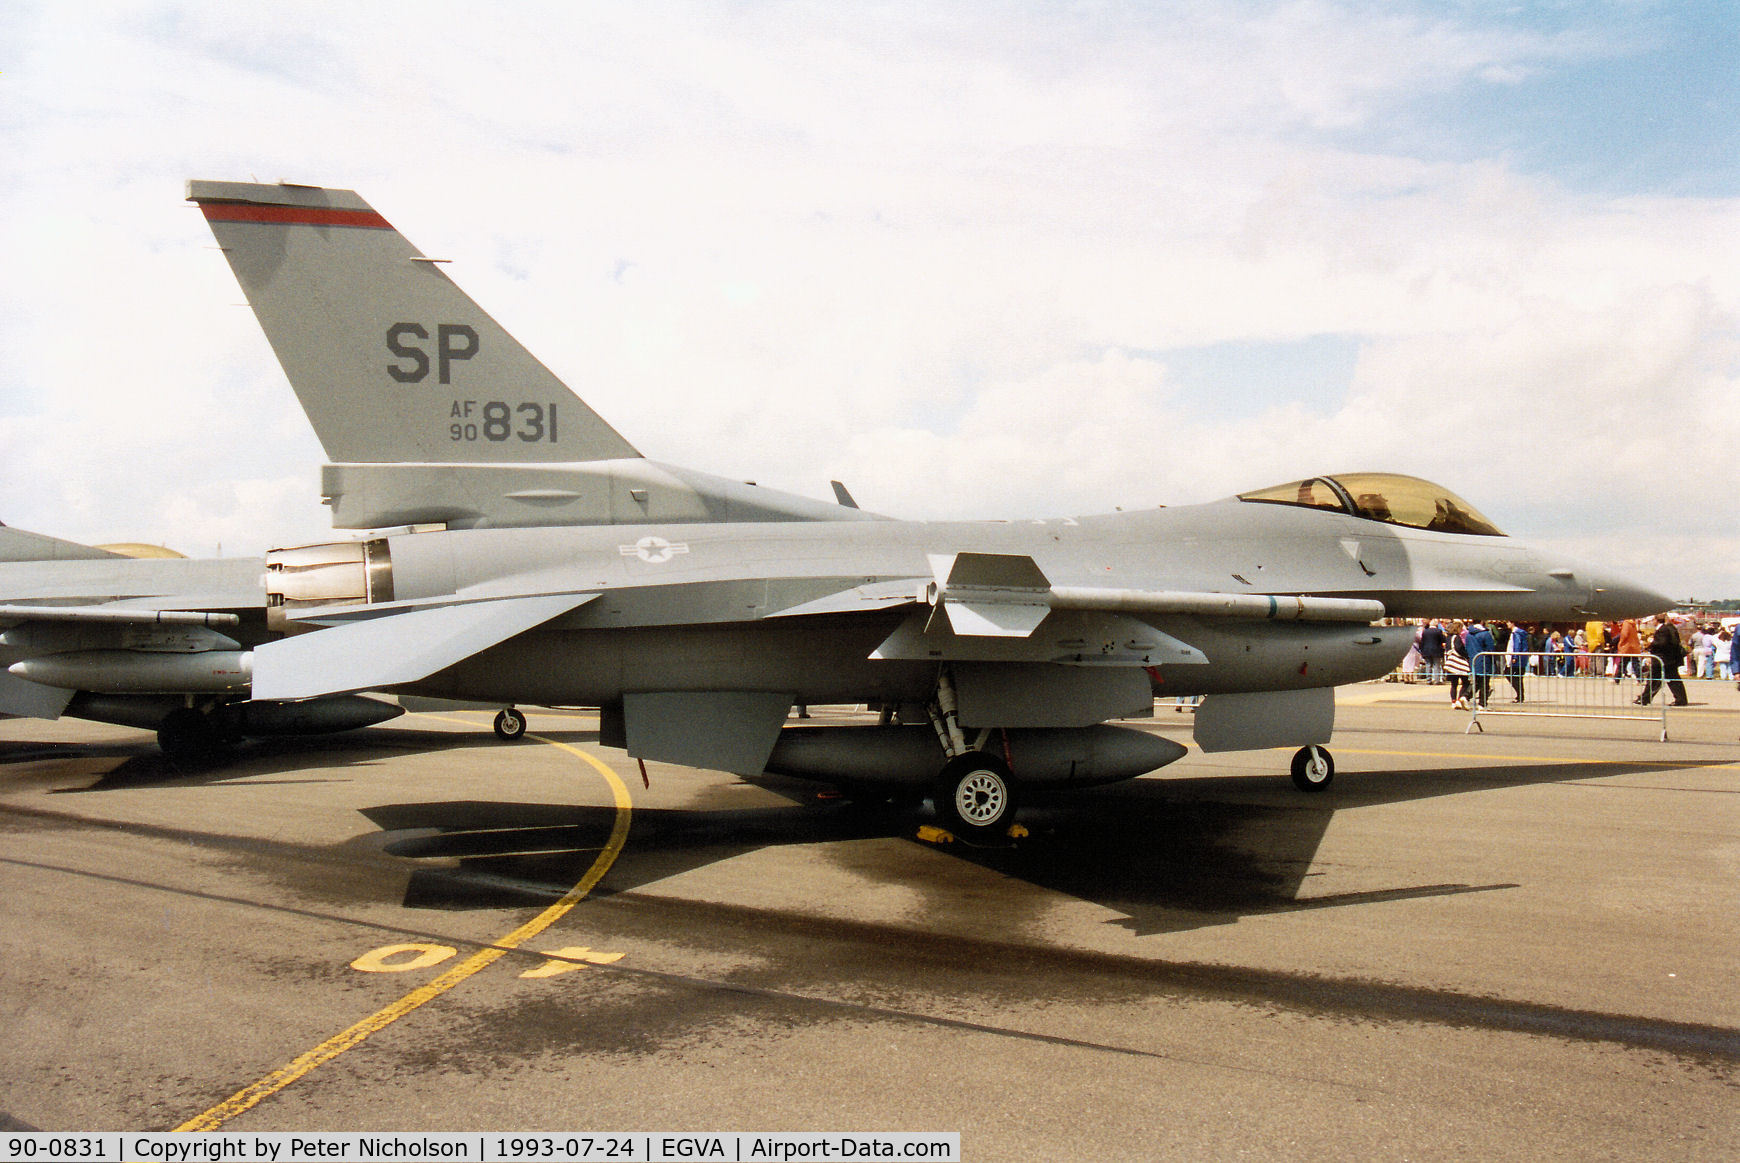 90-0831, 1990 General Dynamics F-16C Fighting Falcon C/N CC-31, F-16C Falcon, callsign Rust 01, of 22nd Fighter Squadron/52nd Fighter Wing at Spangdahlem on display at the 1993 Intnl Air Tattoo at RAF Fairford.